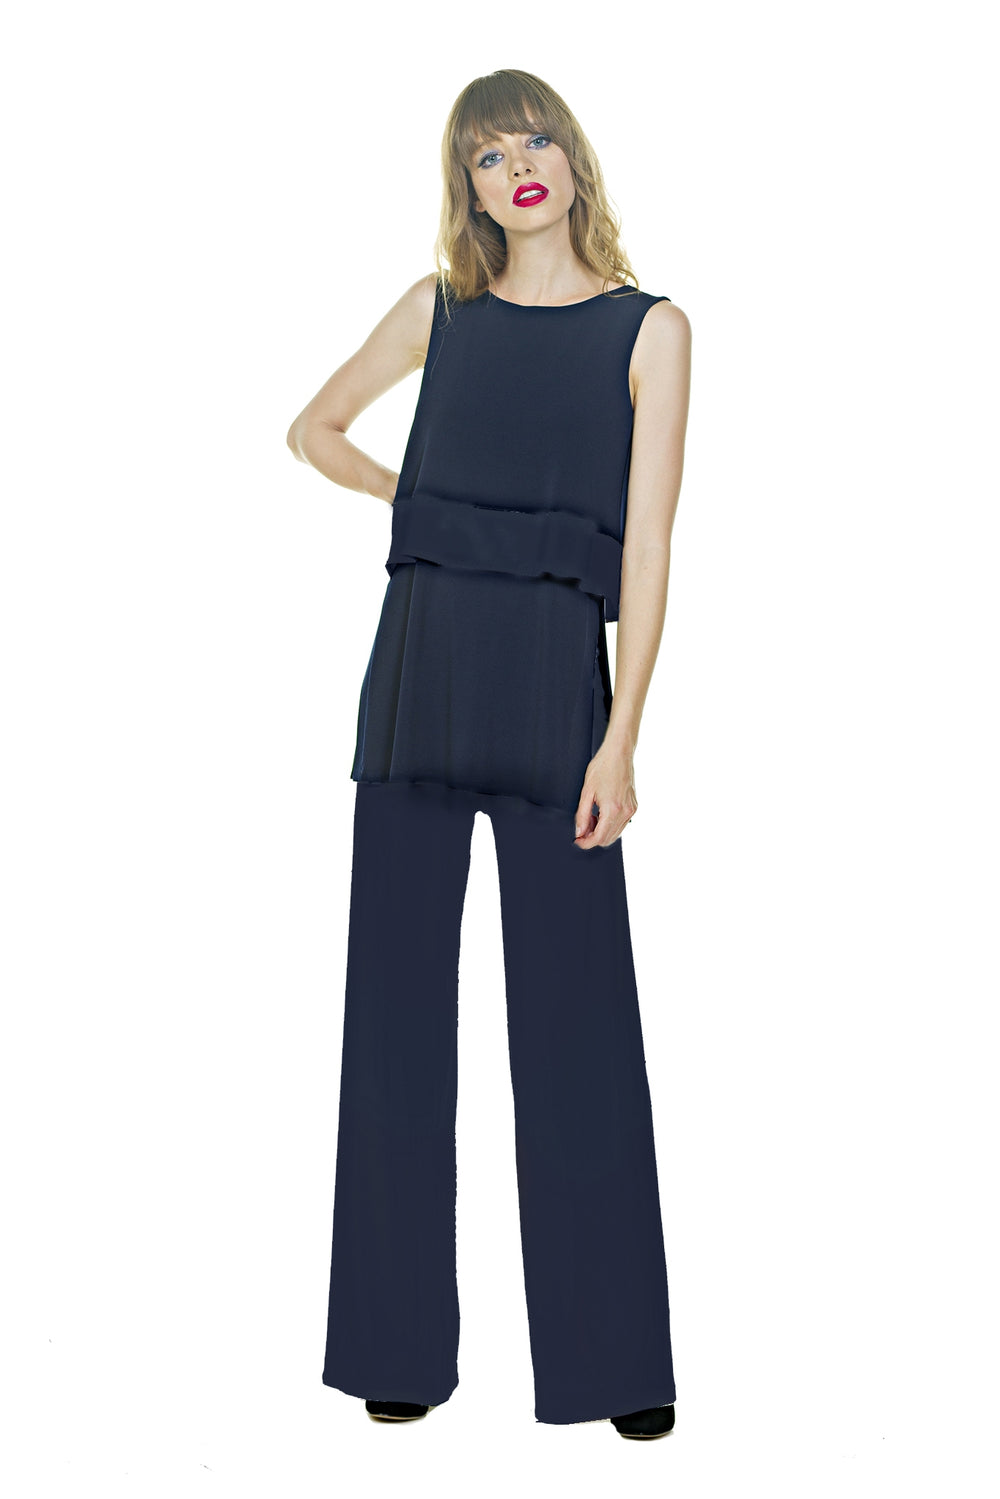 Wide Leg Palazzo Pant - Navy
Cool comfortable palazzo pant are flare with a relaxed fit. Palazzo Pant - Navy (S), (M) - Polyester/Spandex, Hand wash-lay flat to dry - Made in USA
Wide Leg Palazzo Pant - Navy
Cool comfortable palazzo pant are flare with a relaxed fit. Palazzo Pant - Navy (S), (M) - Polyester/Spandex, Hand wash-lay flat to dry - Made in USA
LED12332NAVS-1

$99.99
$99.99
$99.99
pallazo, pallazo pants, pallazos, pants, wide leg pallazo, wide leg pants, wide leg trousers
Pants
Eva Varro
$0
$0
$0